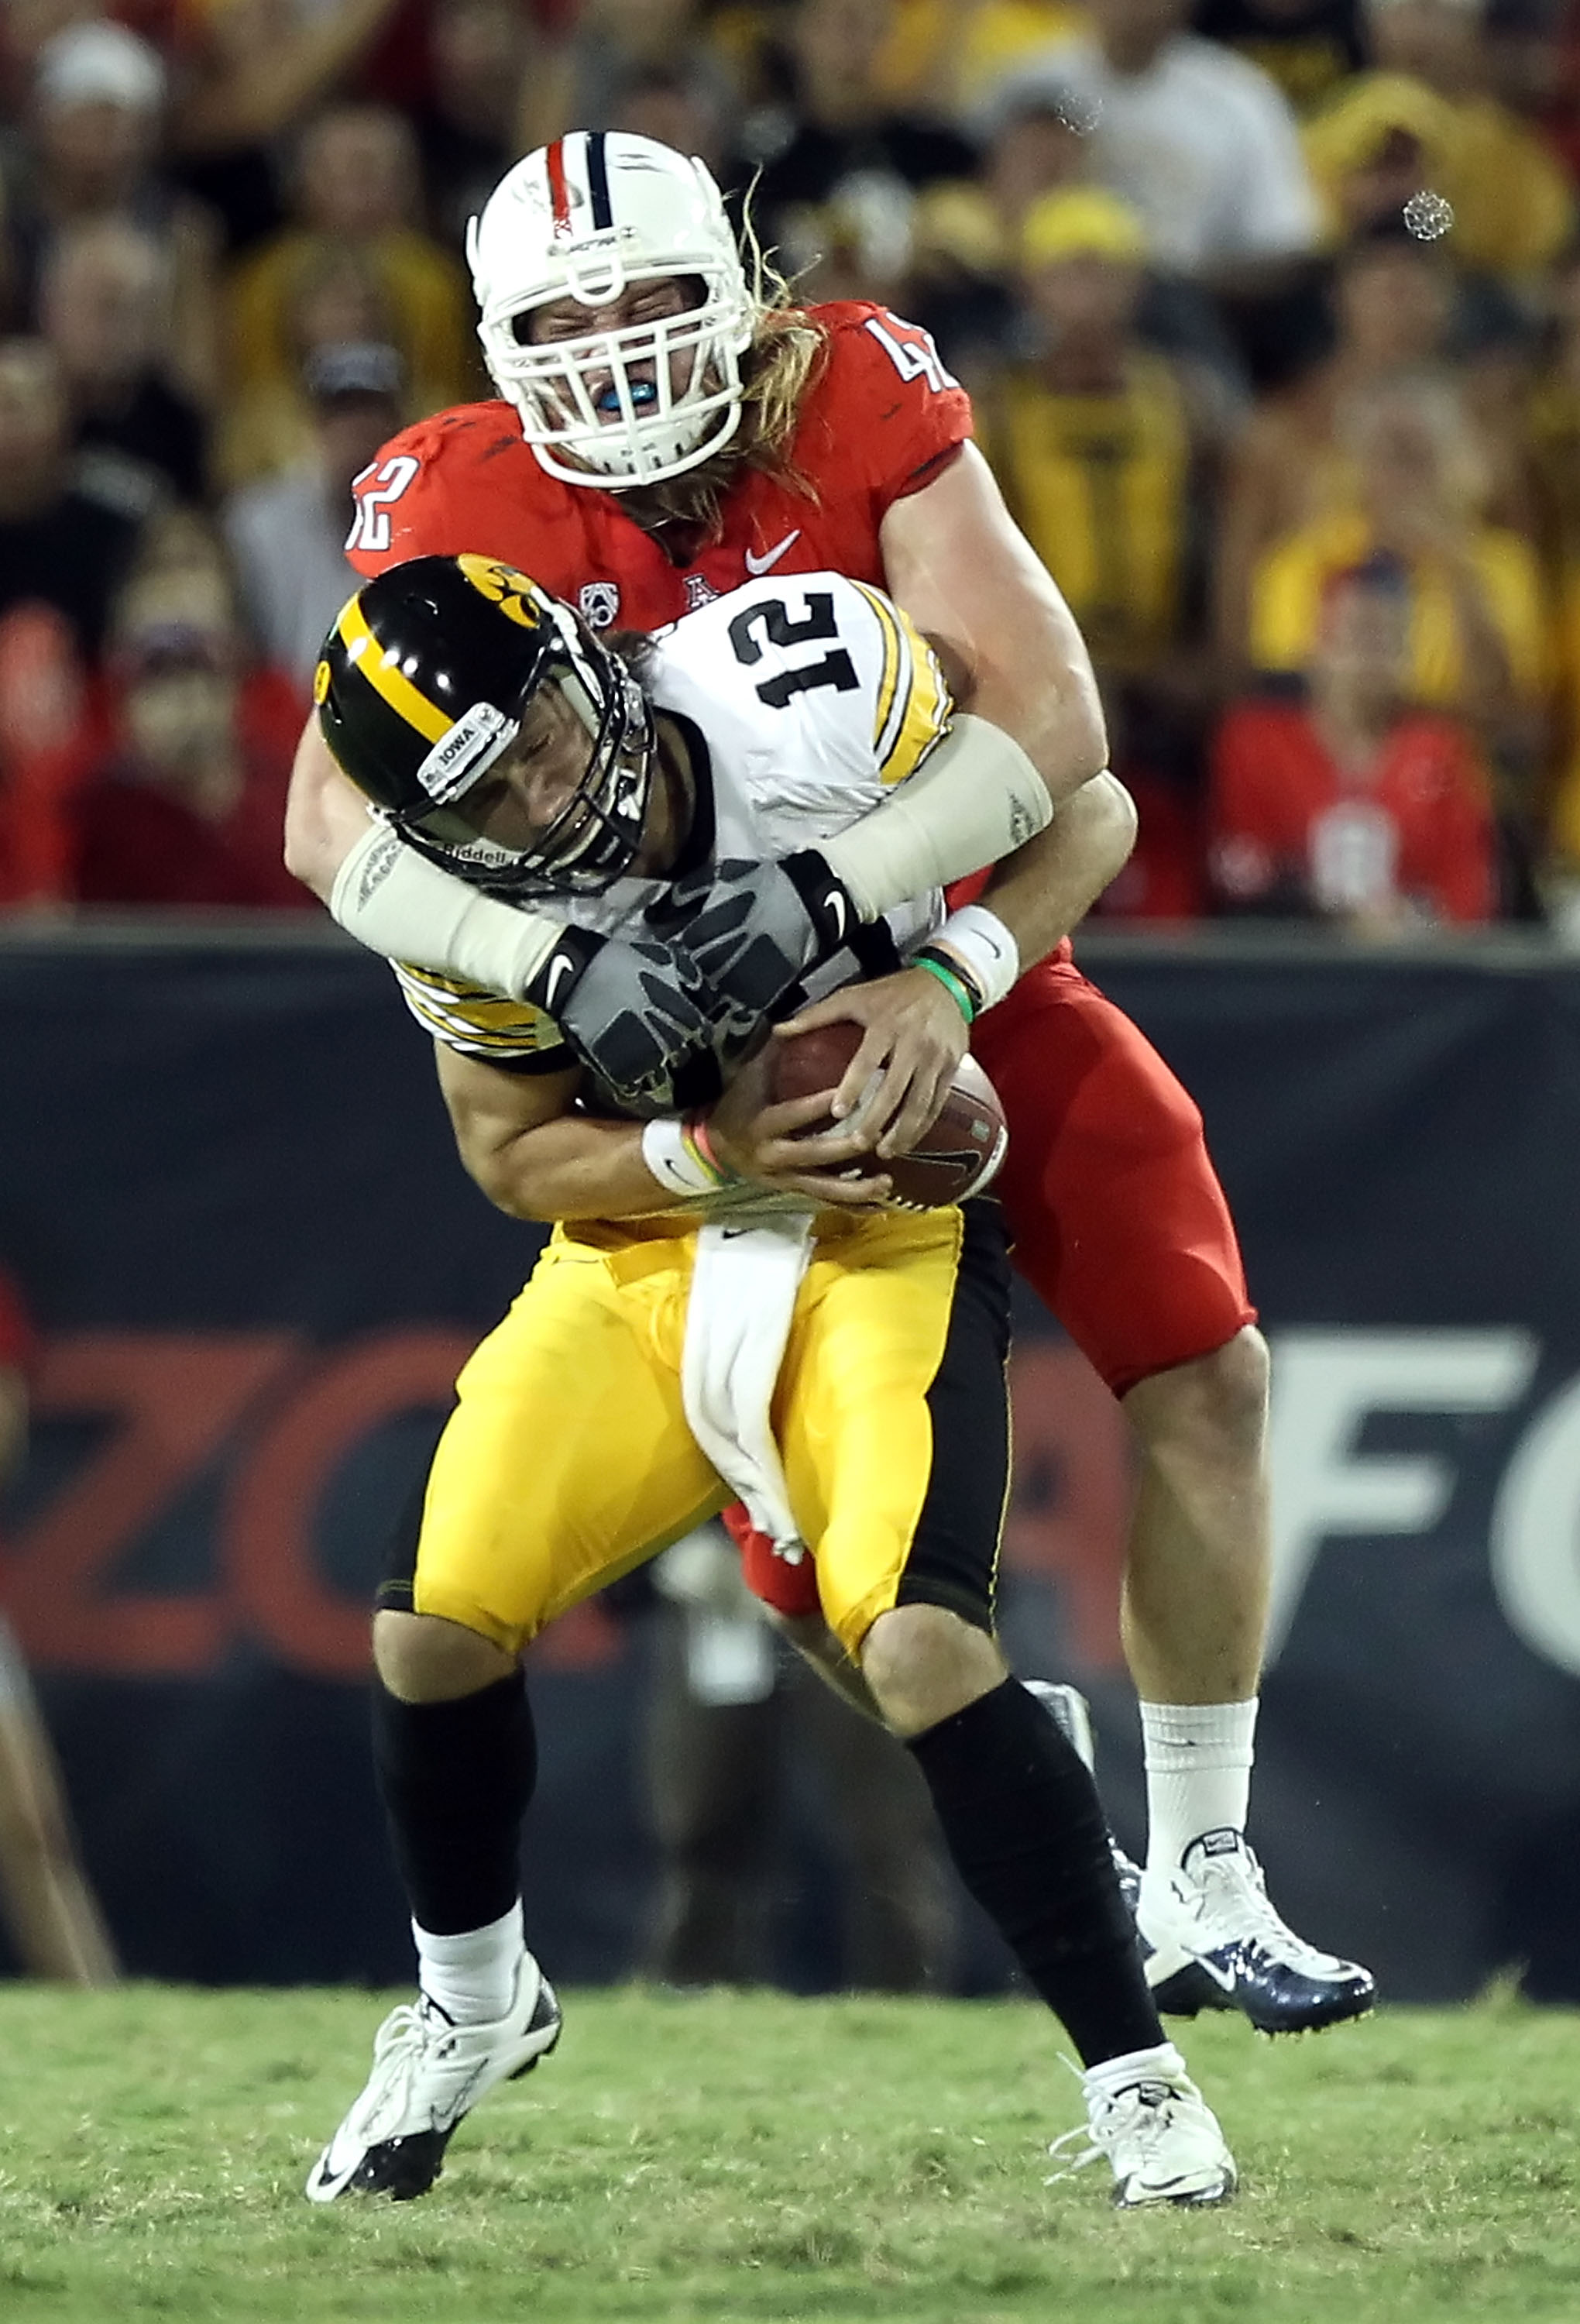 TUCSON, AZ - SEPTEMBER 18:  Quarterback Ricky Stanzi #12 of the Iowa Hawkeyes is sacked by Brooks Reed #42 of the Arizona Wildcats during the third quarter of the college football game at Arizona Stadium on September 18, 2010 in Tucson, Arizona.  The Wild